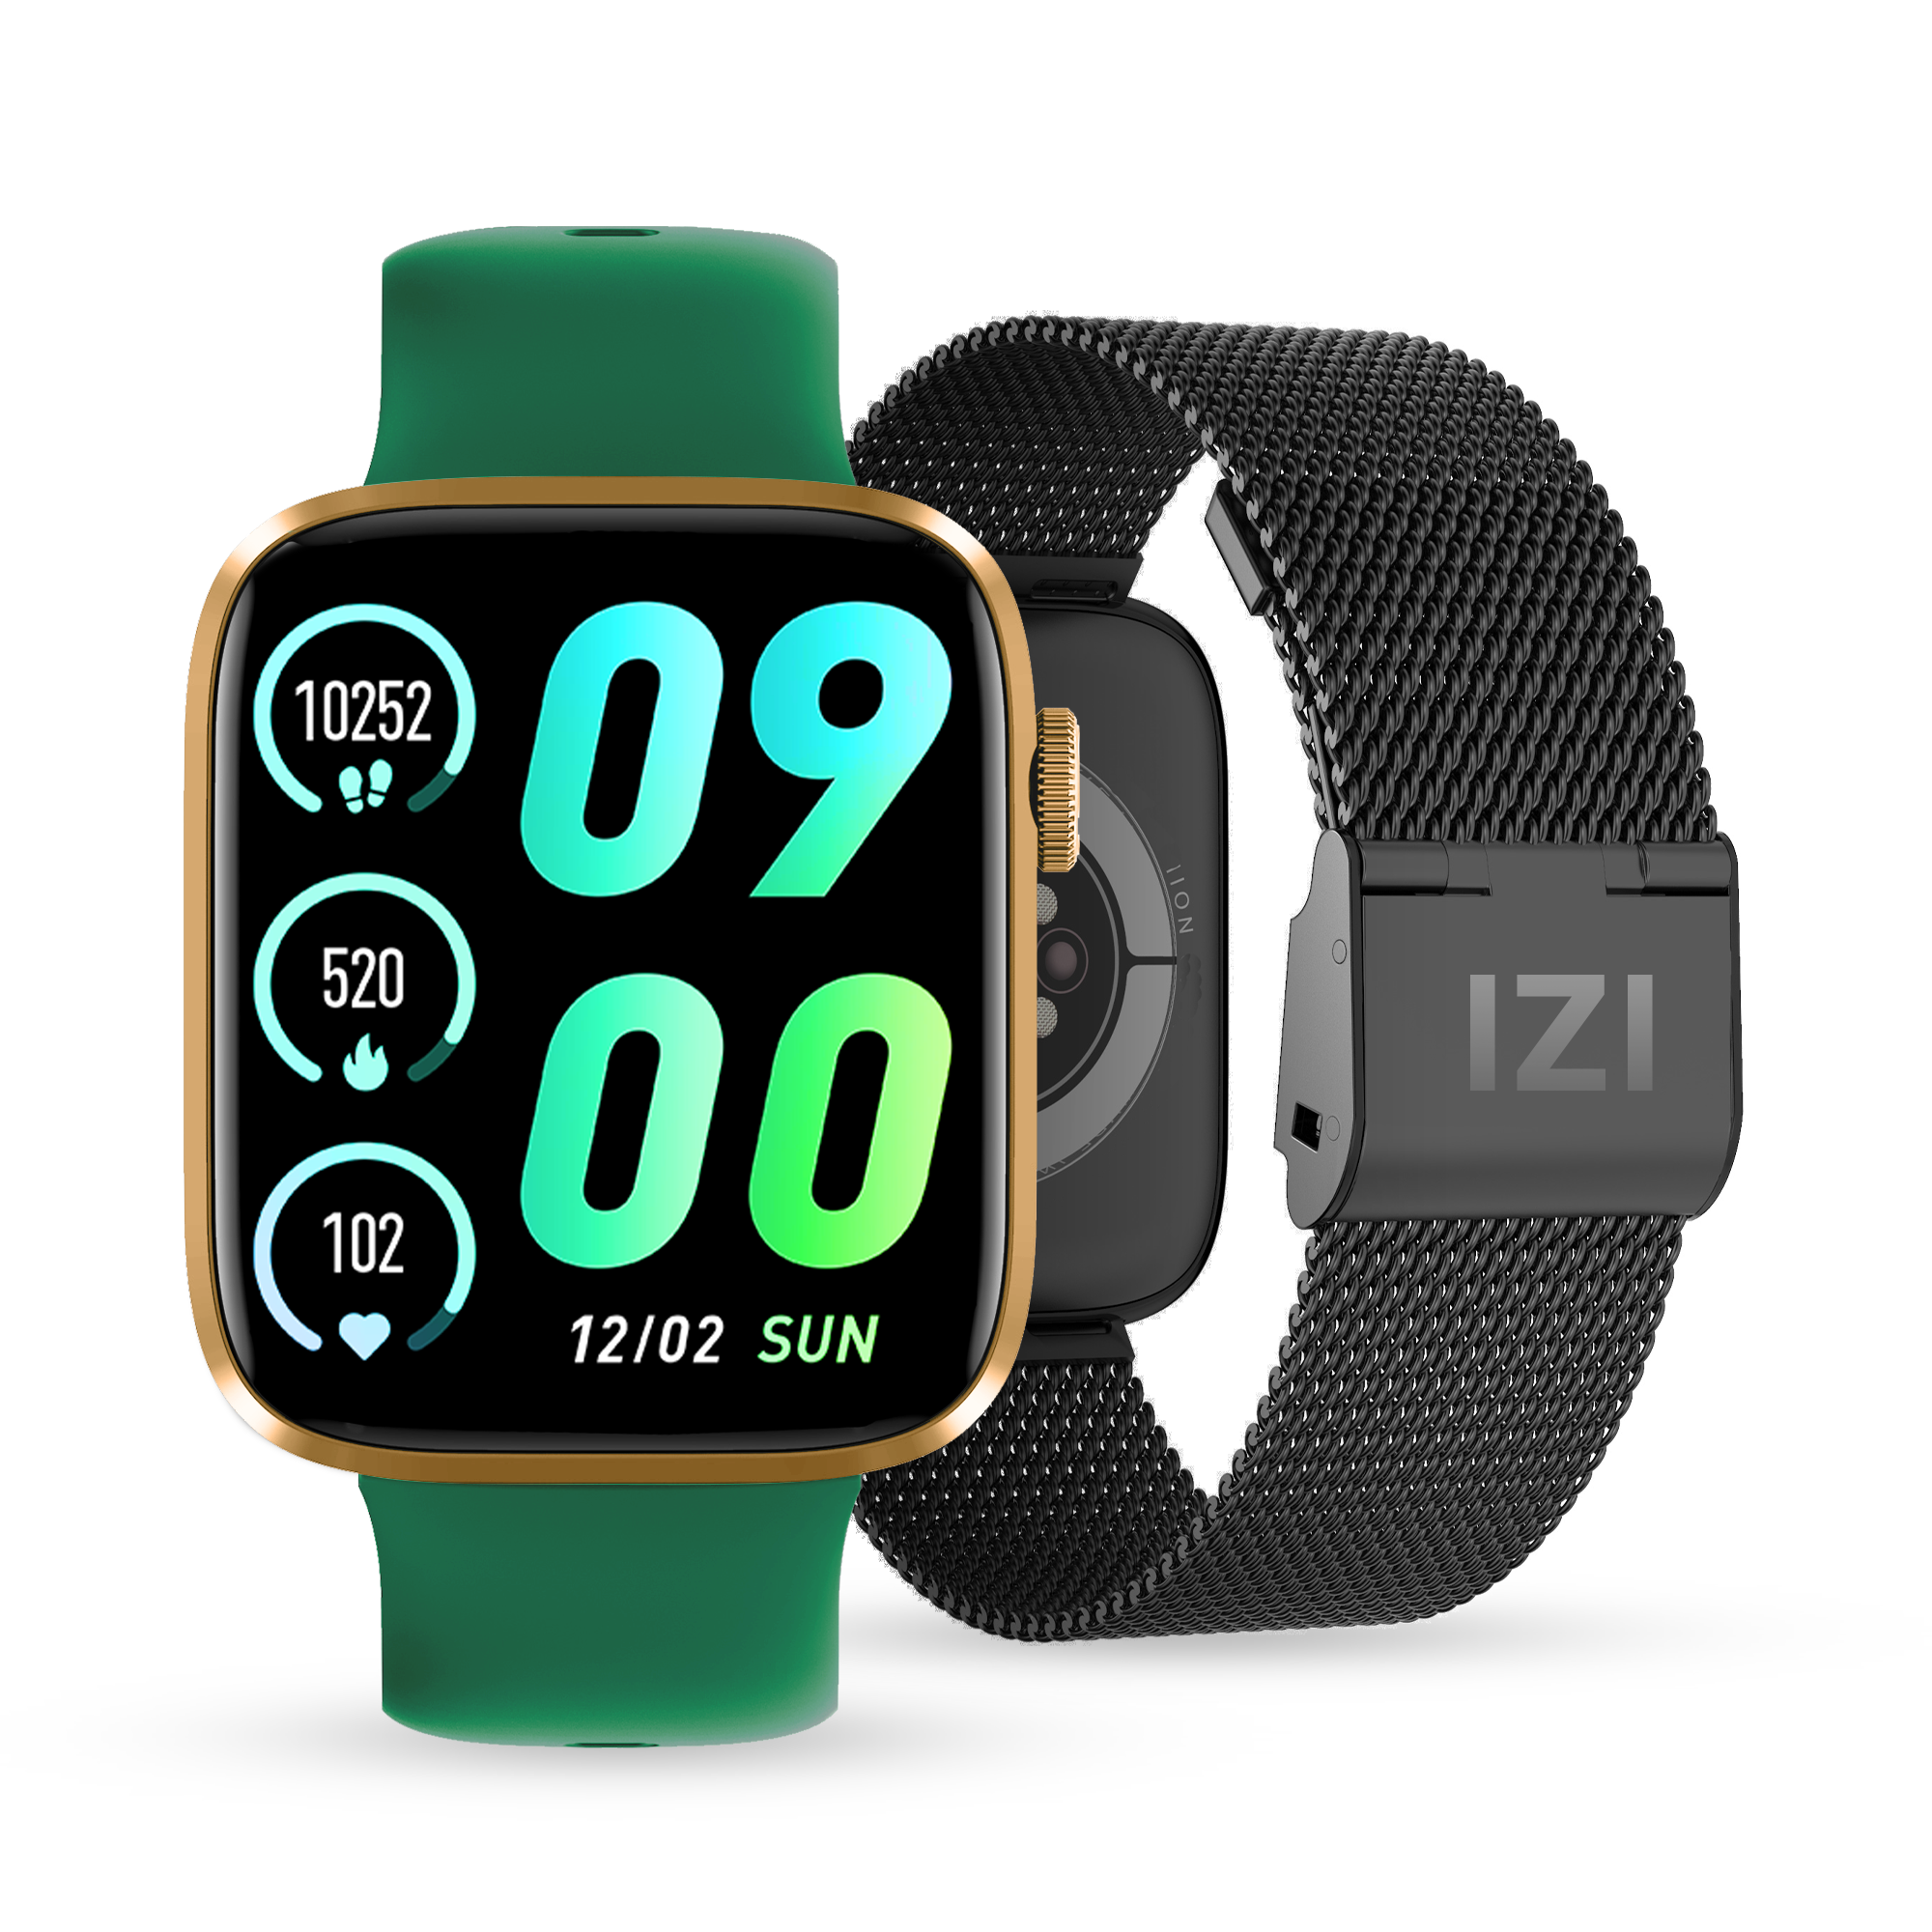 IZI 1.92"Smart Pro Retina Display Smart Watch for Men, Bluetooth Calling, AI Voice Assistant, Sports Mode, 24*7 Health Monitoring, BP, SPO2, IP68 ,500+ Watch Faces, 5 Days Battery, 2 Premium Straps